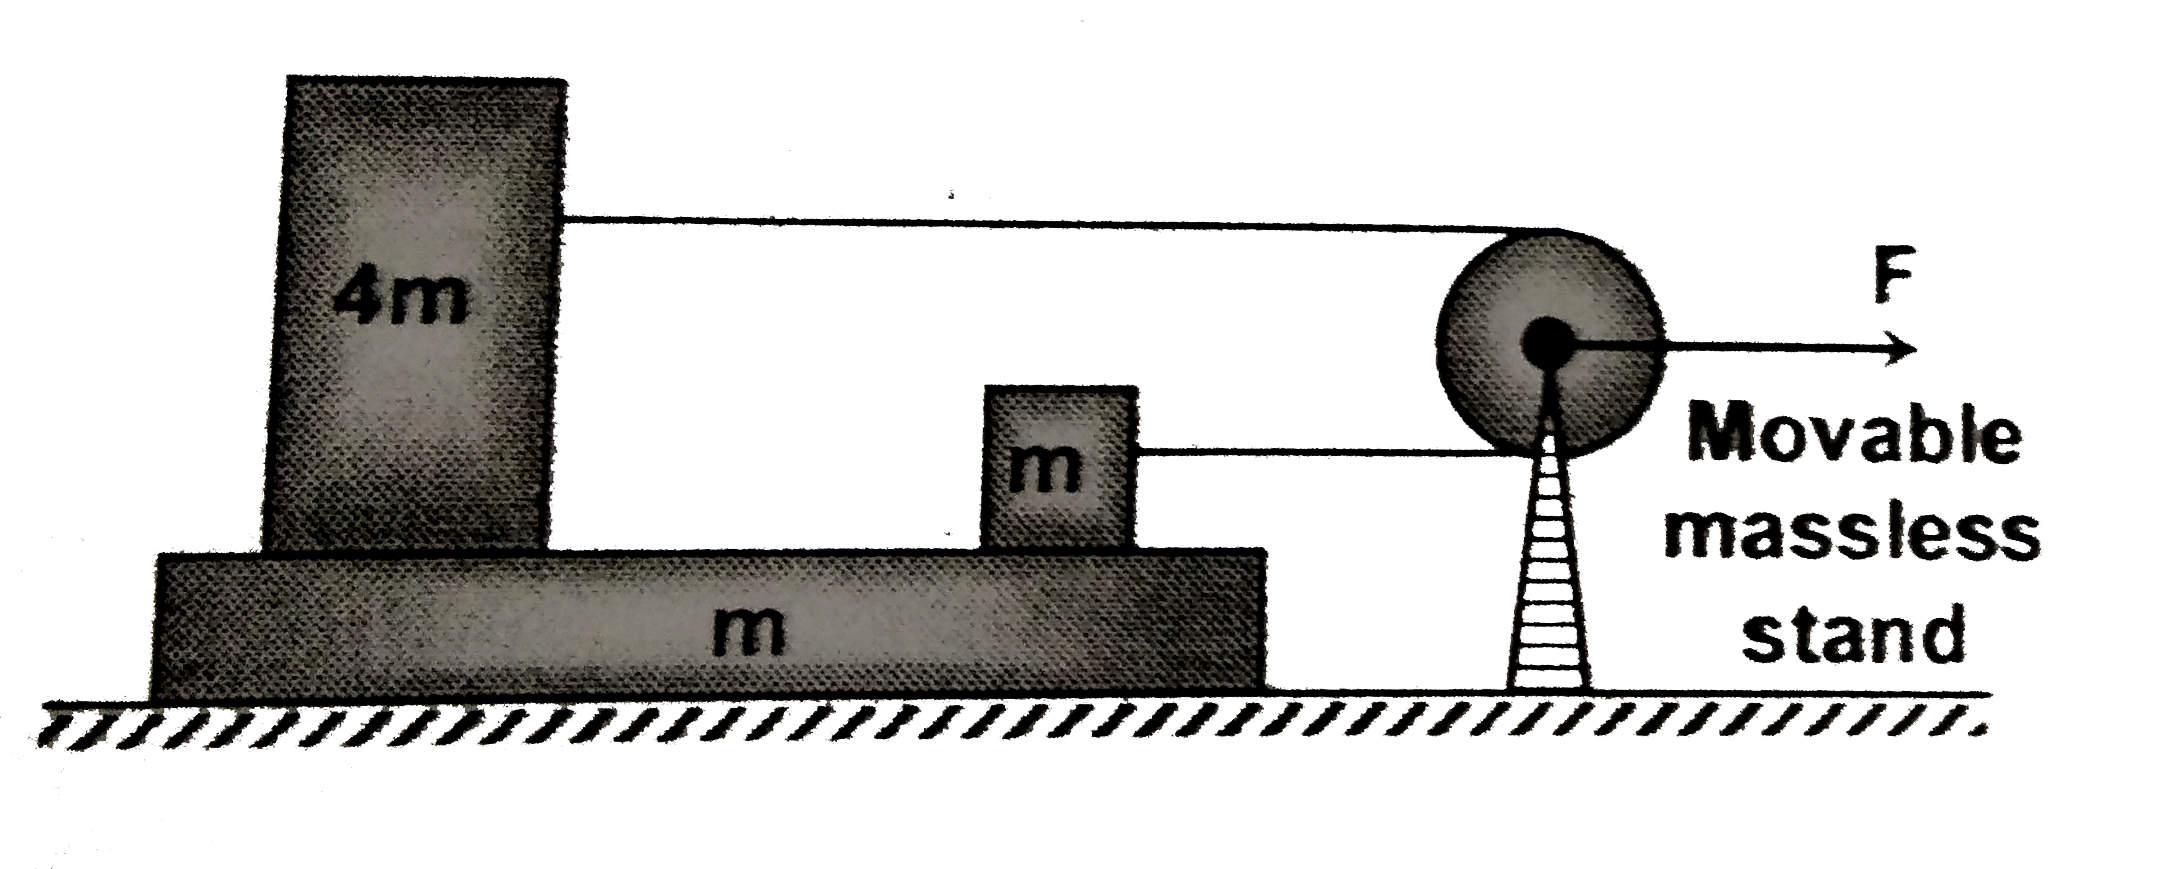 In the given figure, a long platform of mass m is placed on frictionless surface. Two blocks of masses 4 m and m (where m=10 kg) are placed on the platform. For both blocks, the coefficient of static friction with platform equal to 0.16 and the coefficient of kinetic friction equal to 0.10 the blocks are connected by a light ideal string through a light pulley (mounted at a movable massless stand). Which is acted upon by an unknown horizontal force F. if the acceleration of the platform is 2m//s^(2). Find the value of unknown force F and acceleration of blocks 4 m and m on a(1) and a(2) respectively.